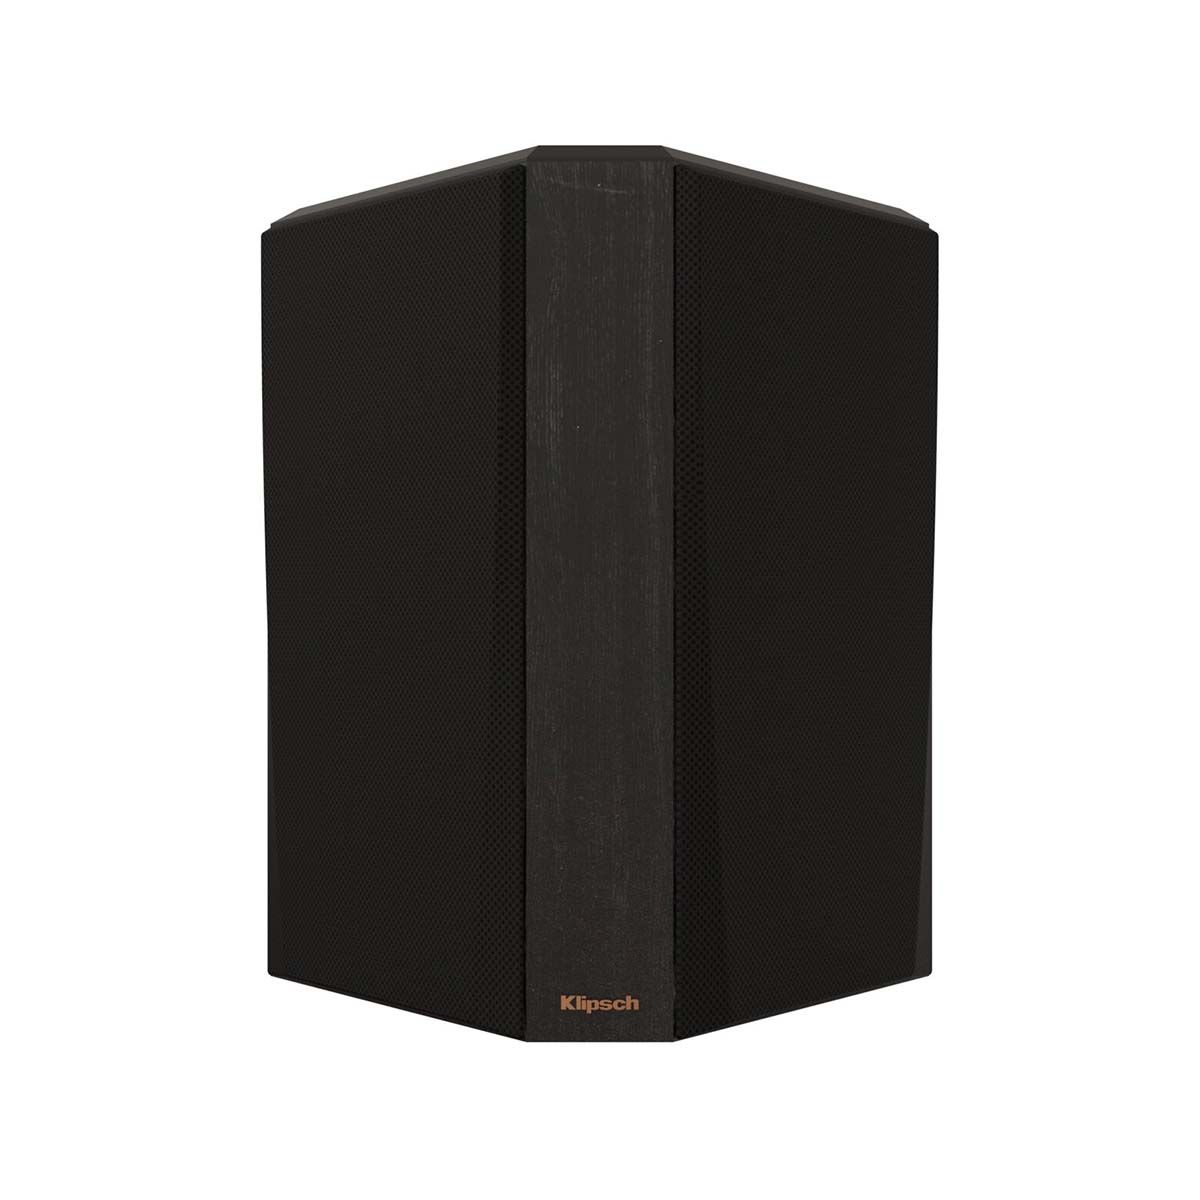 Klipsch RP-502S II Surround Speakers - Ebony - front view of single with grill